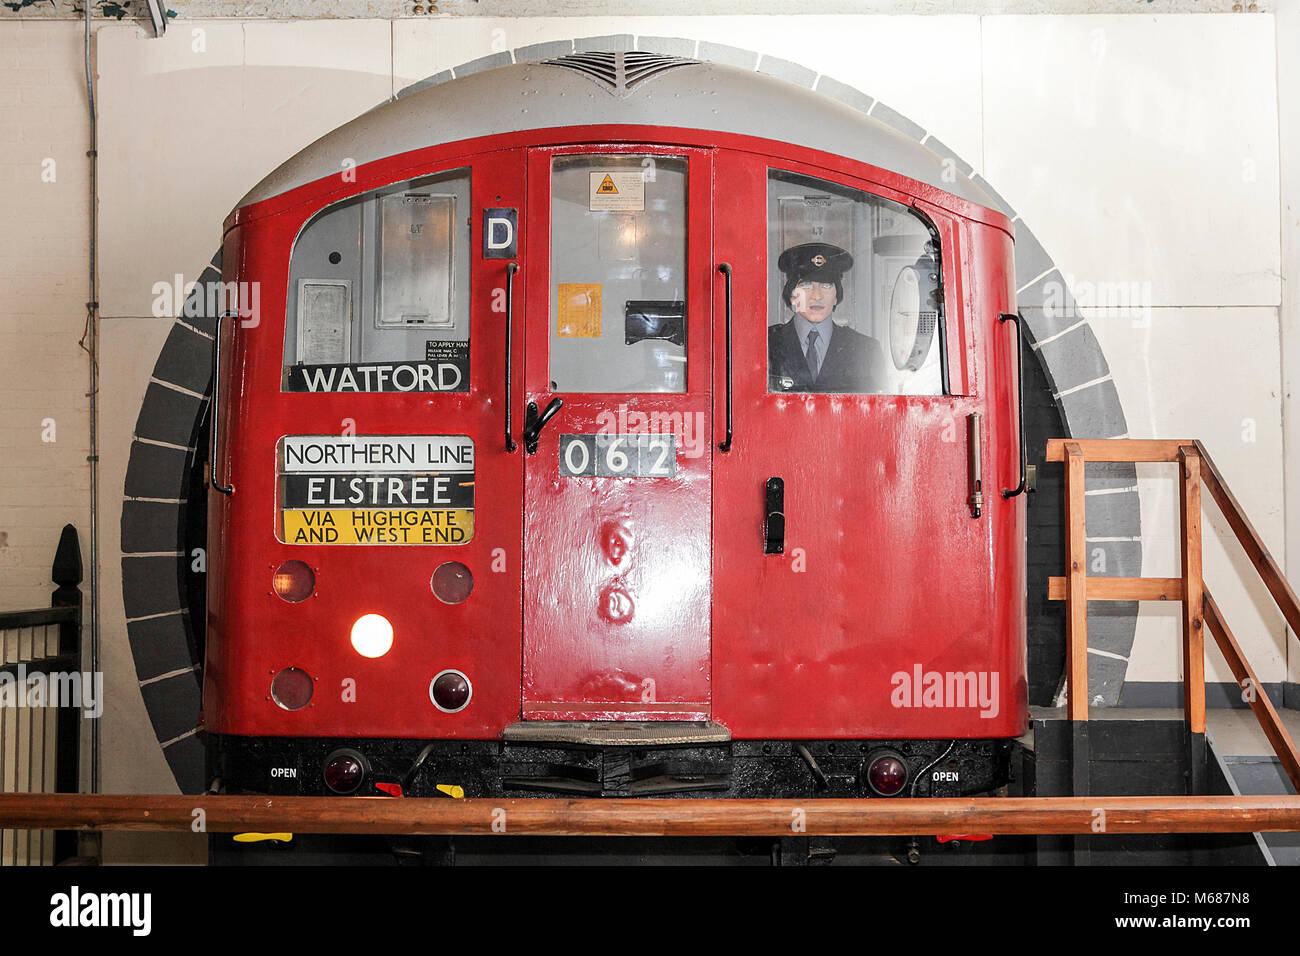 One of (4) images in this set recording railway baggage, tube train and Quainton Rd Station Platform. Stock Photo